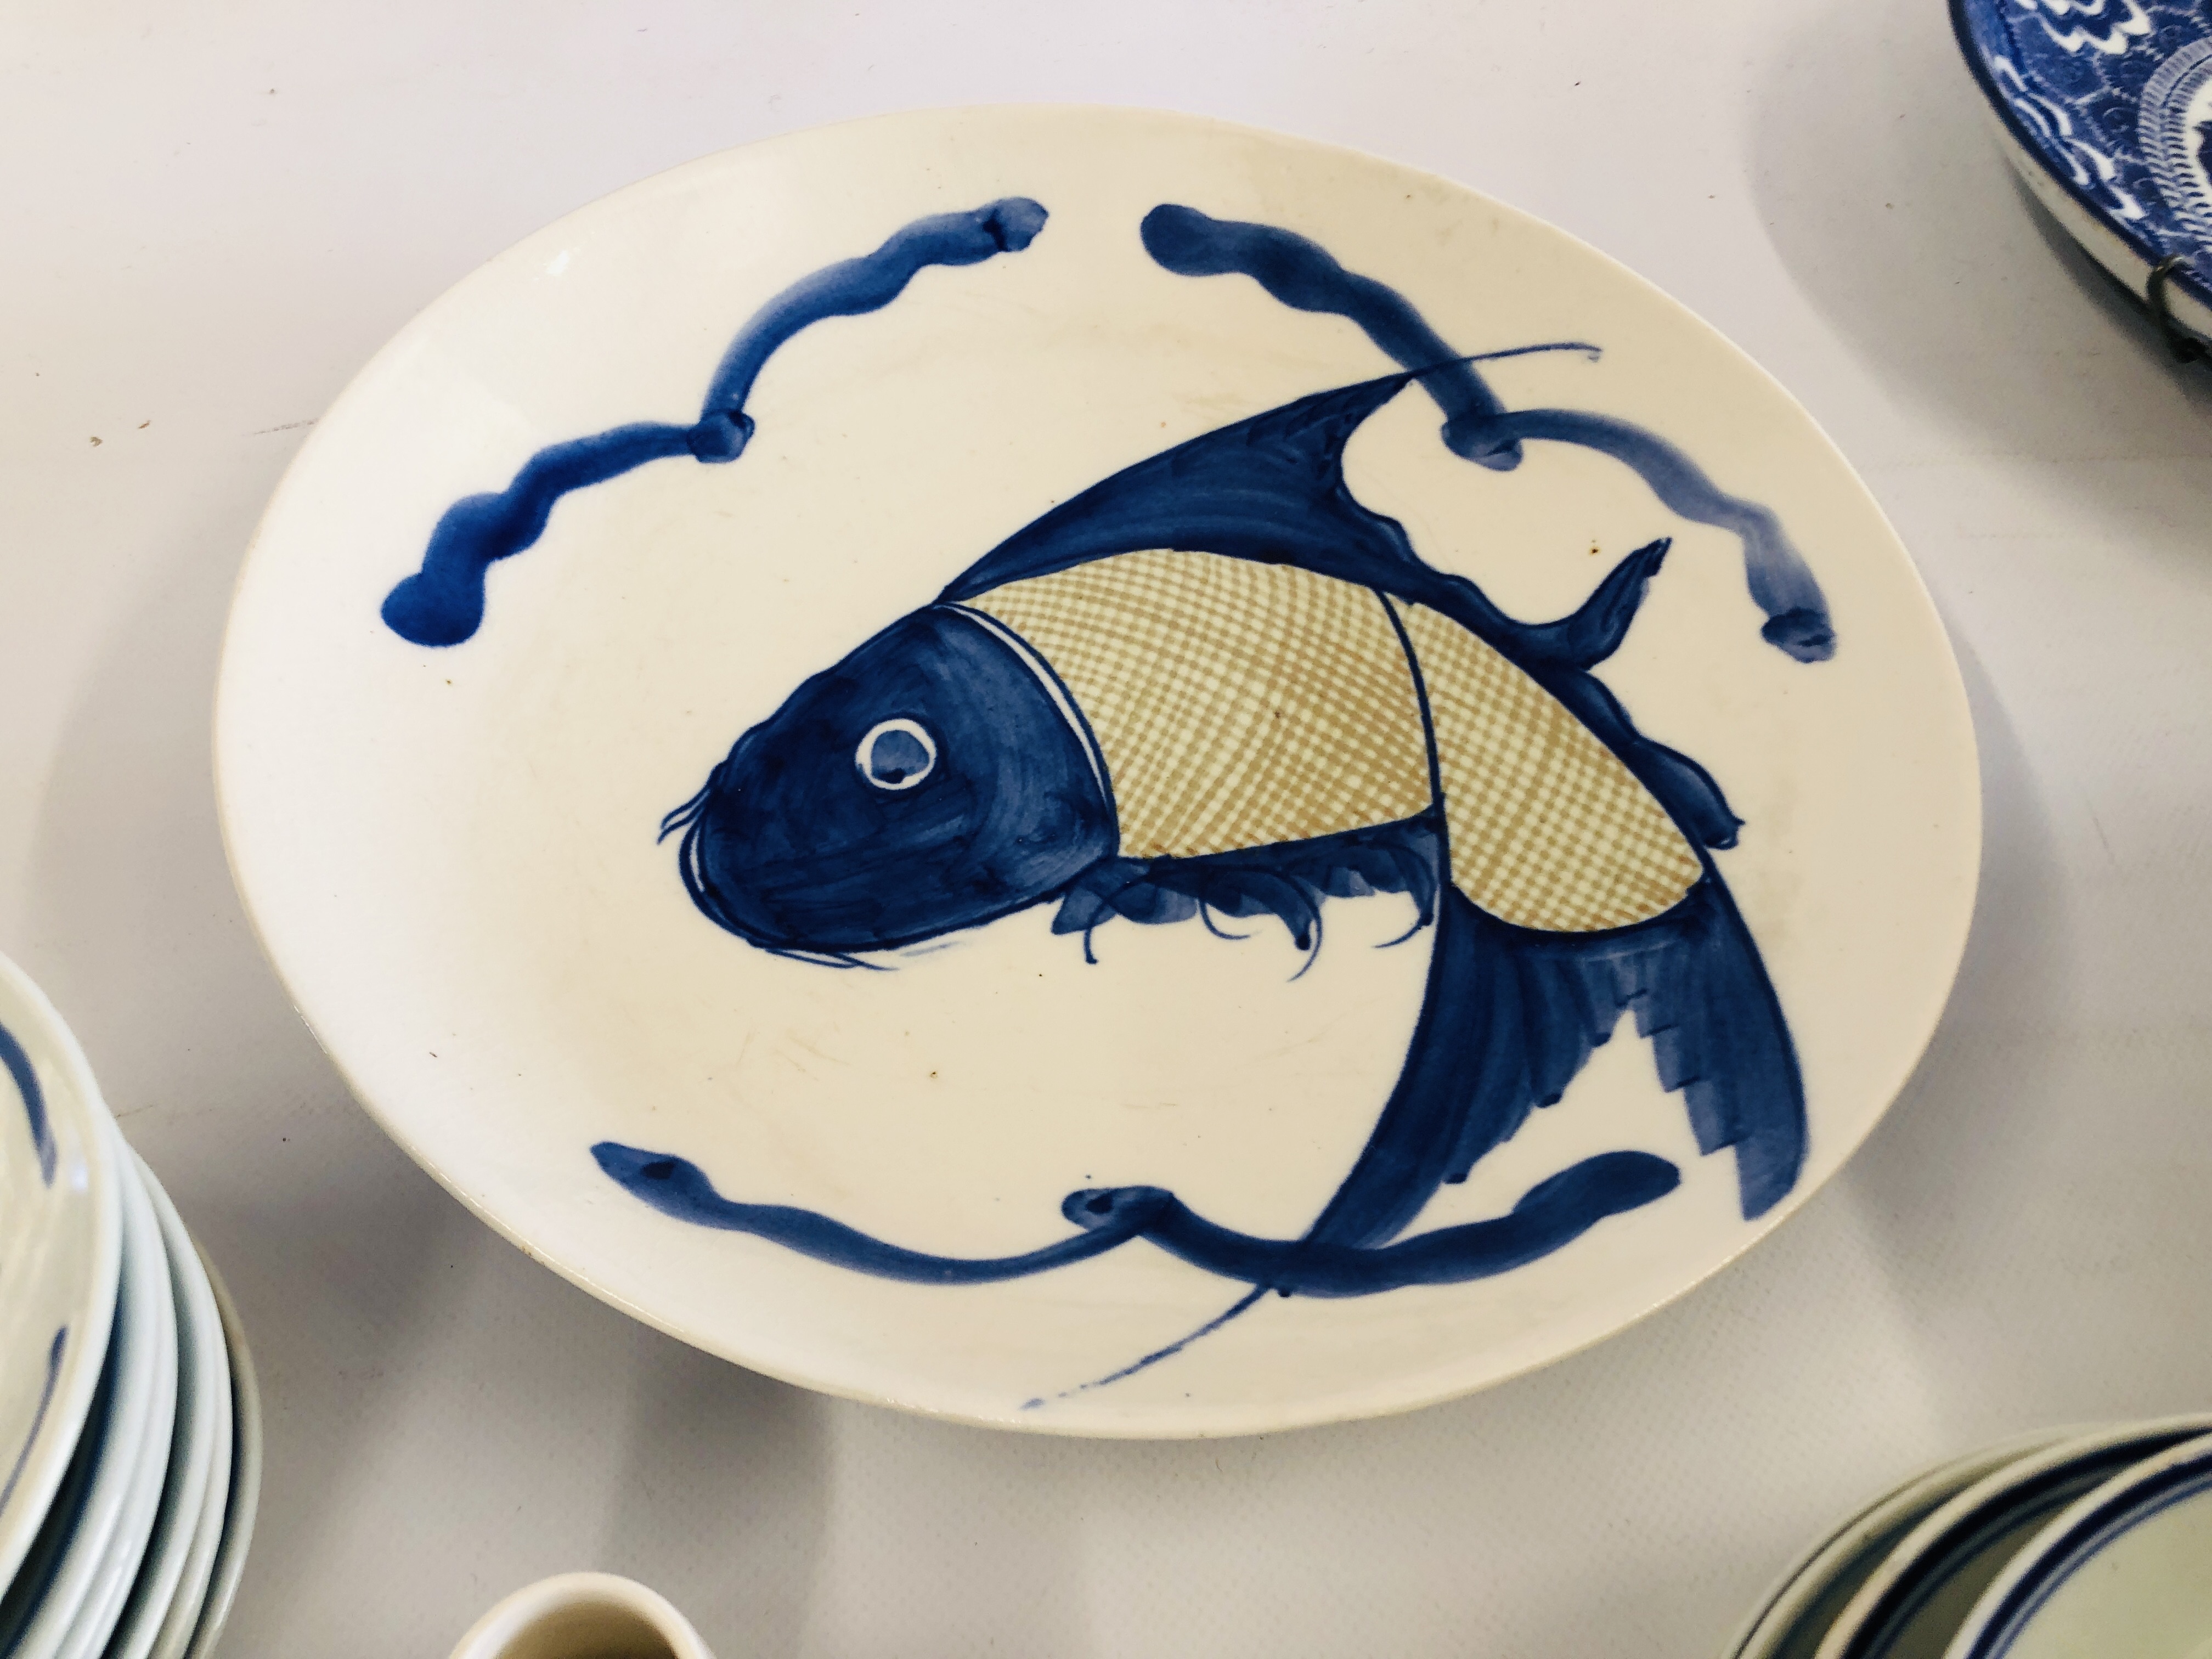 A GROUP OF CHINESE BLUE AND WHITE PLATES AND DISHES DECORATED WITH A FISH SYMBOL ALONG WITH A - Image 8 of 14